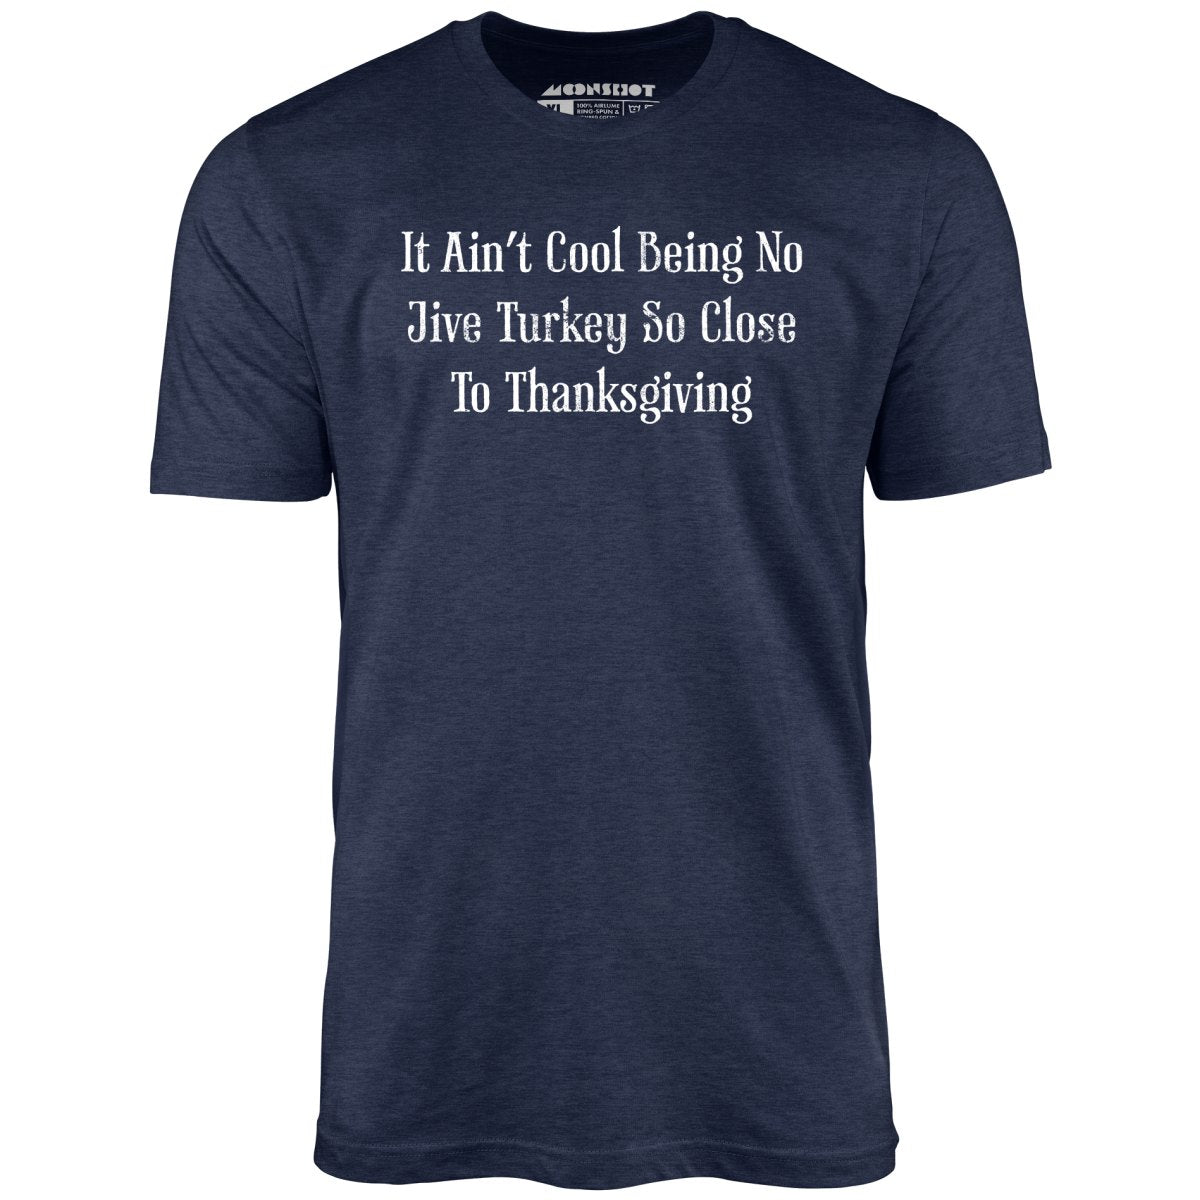 It Ain't Cool Being No Jive Turkey So Close to Thanksgiving - Unisex T-Shirt